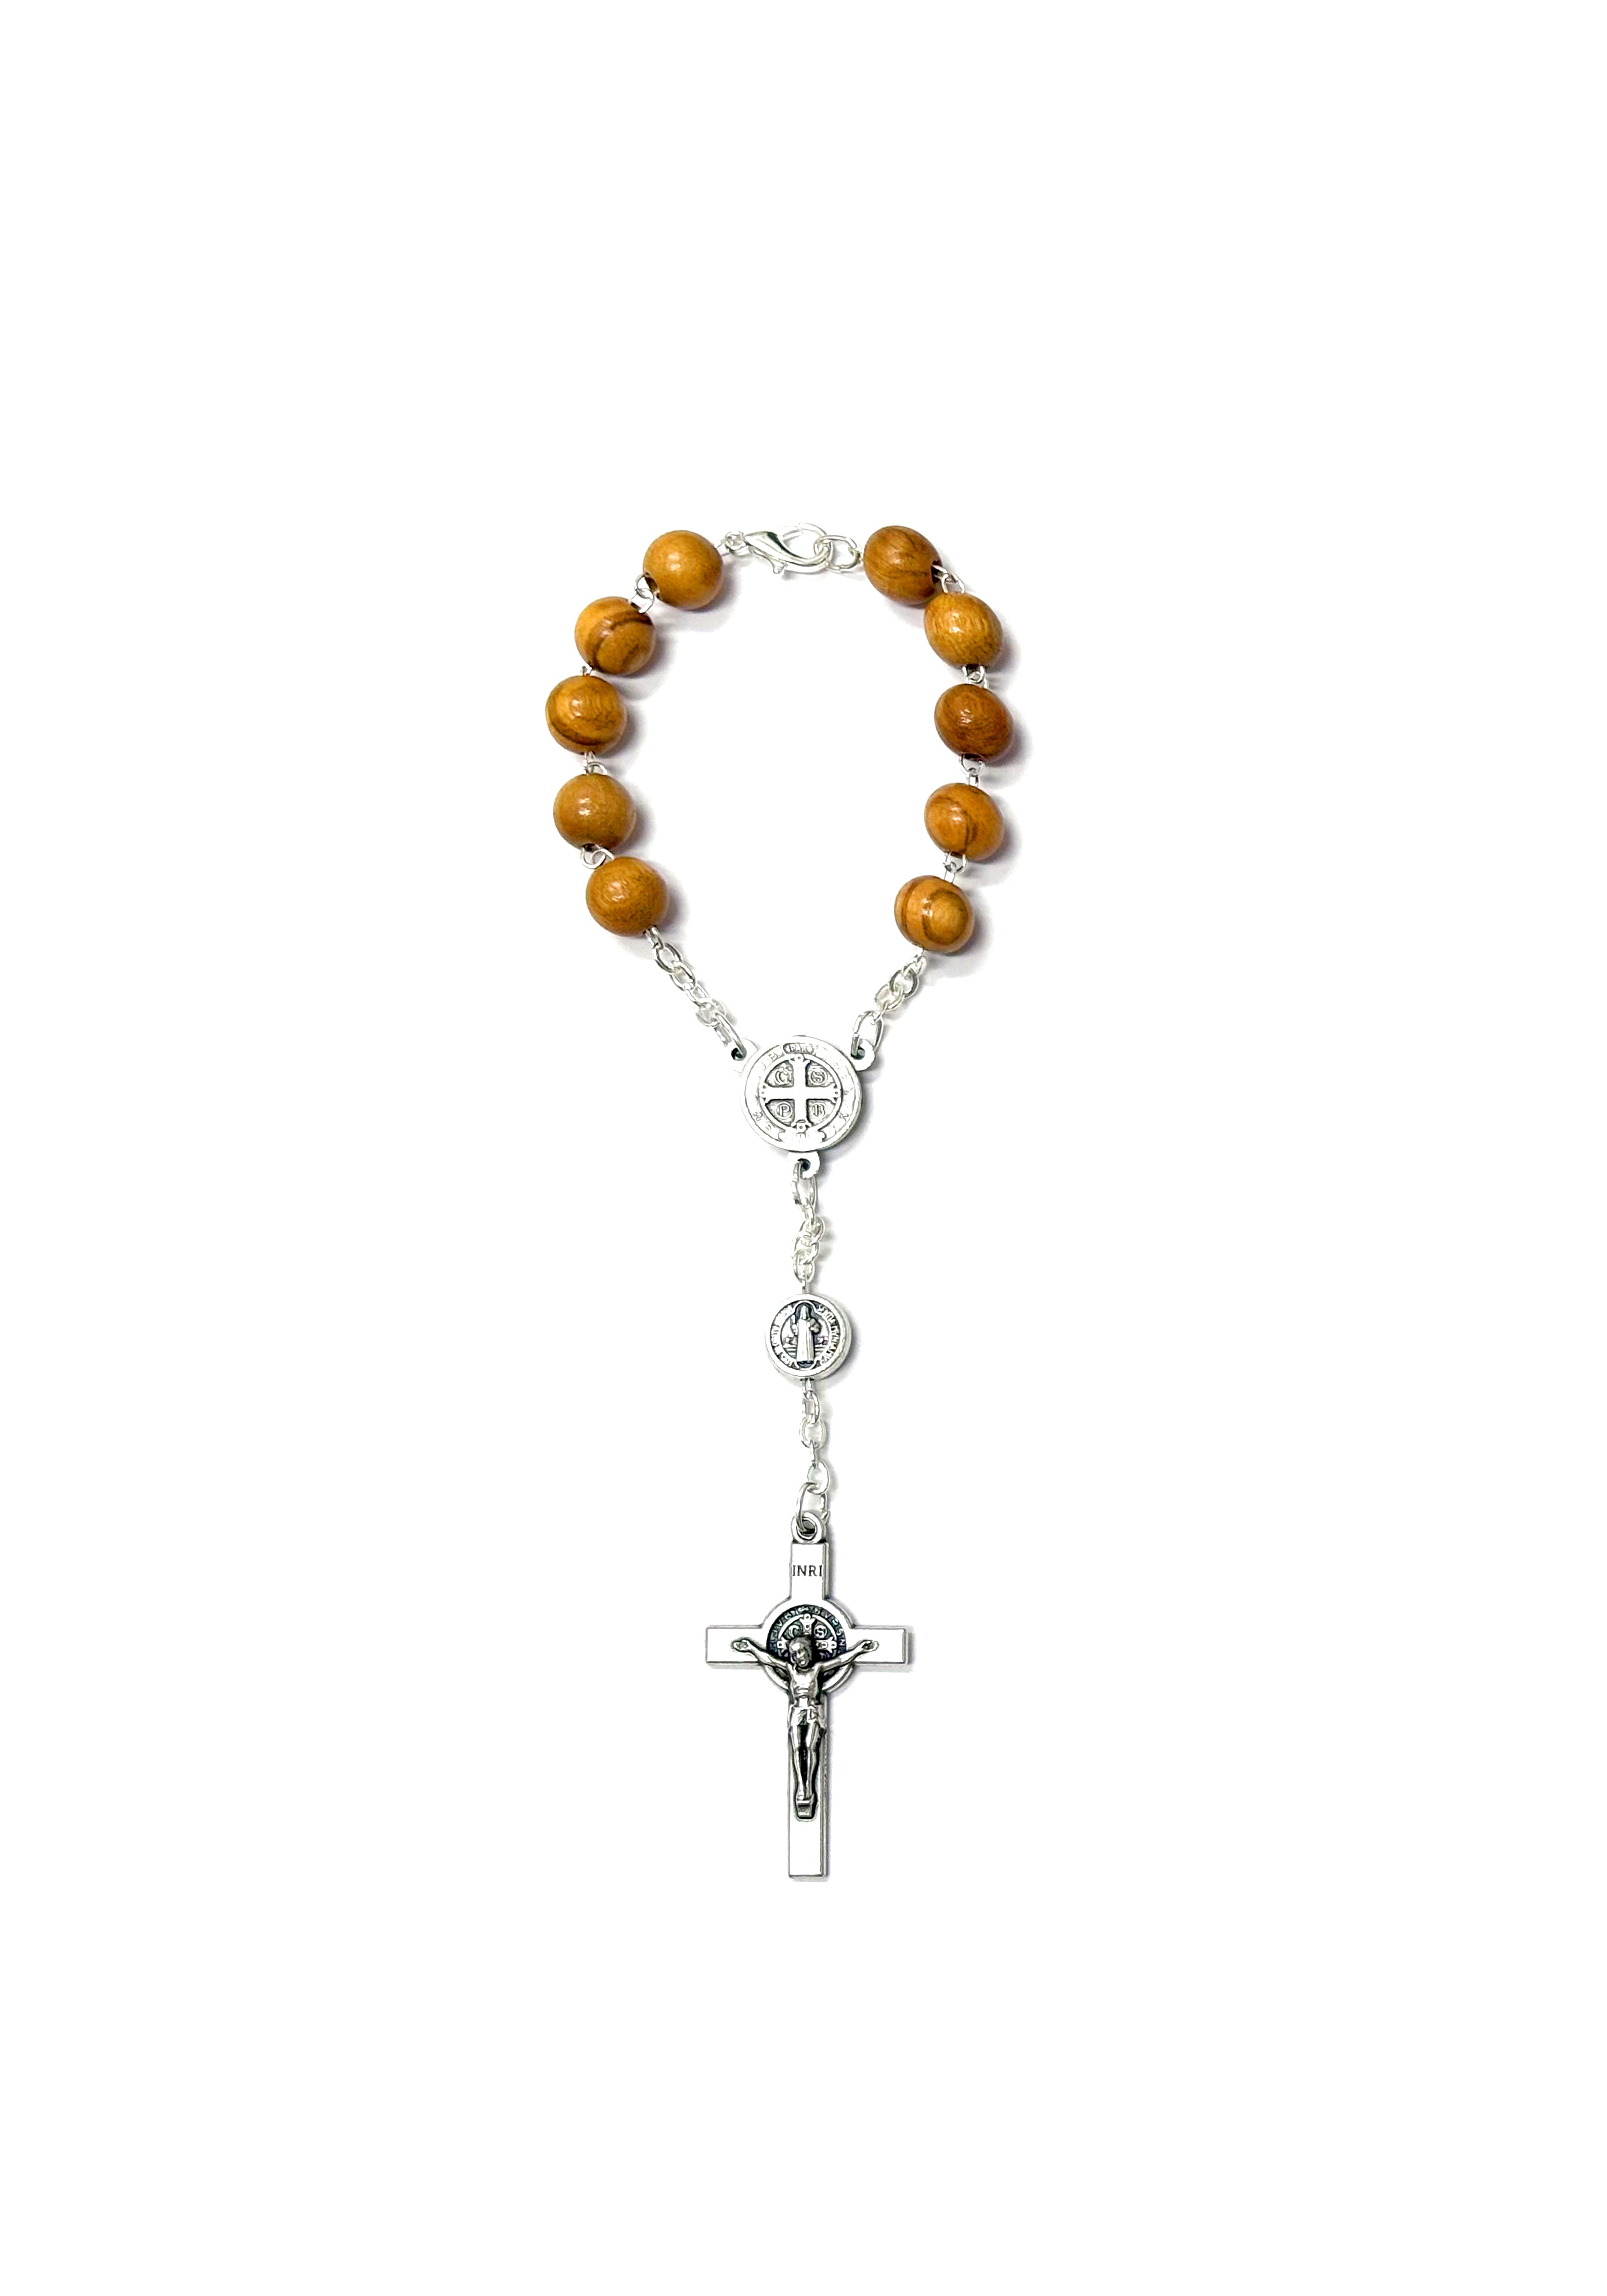 Wooden car rosary with medal and cross of Saint Benedict